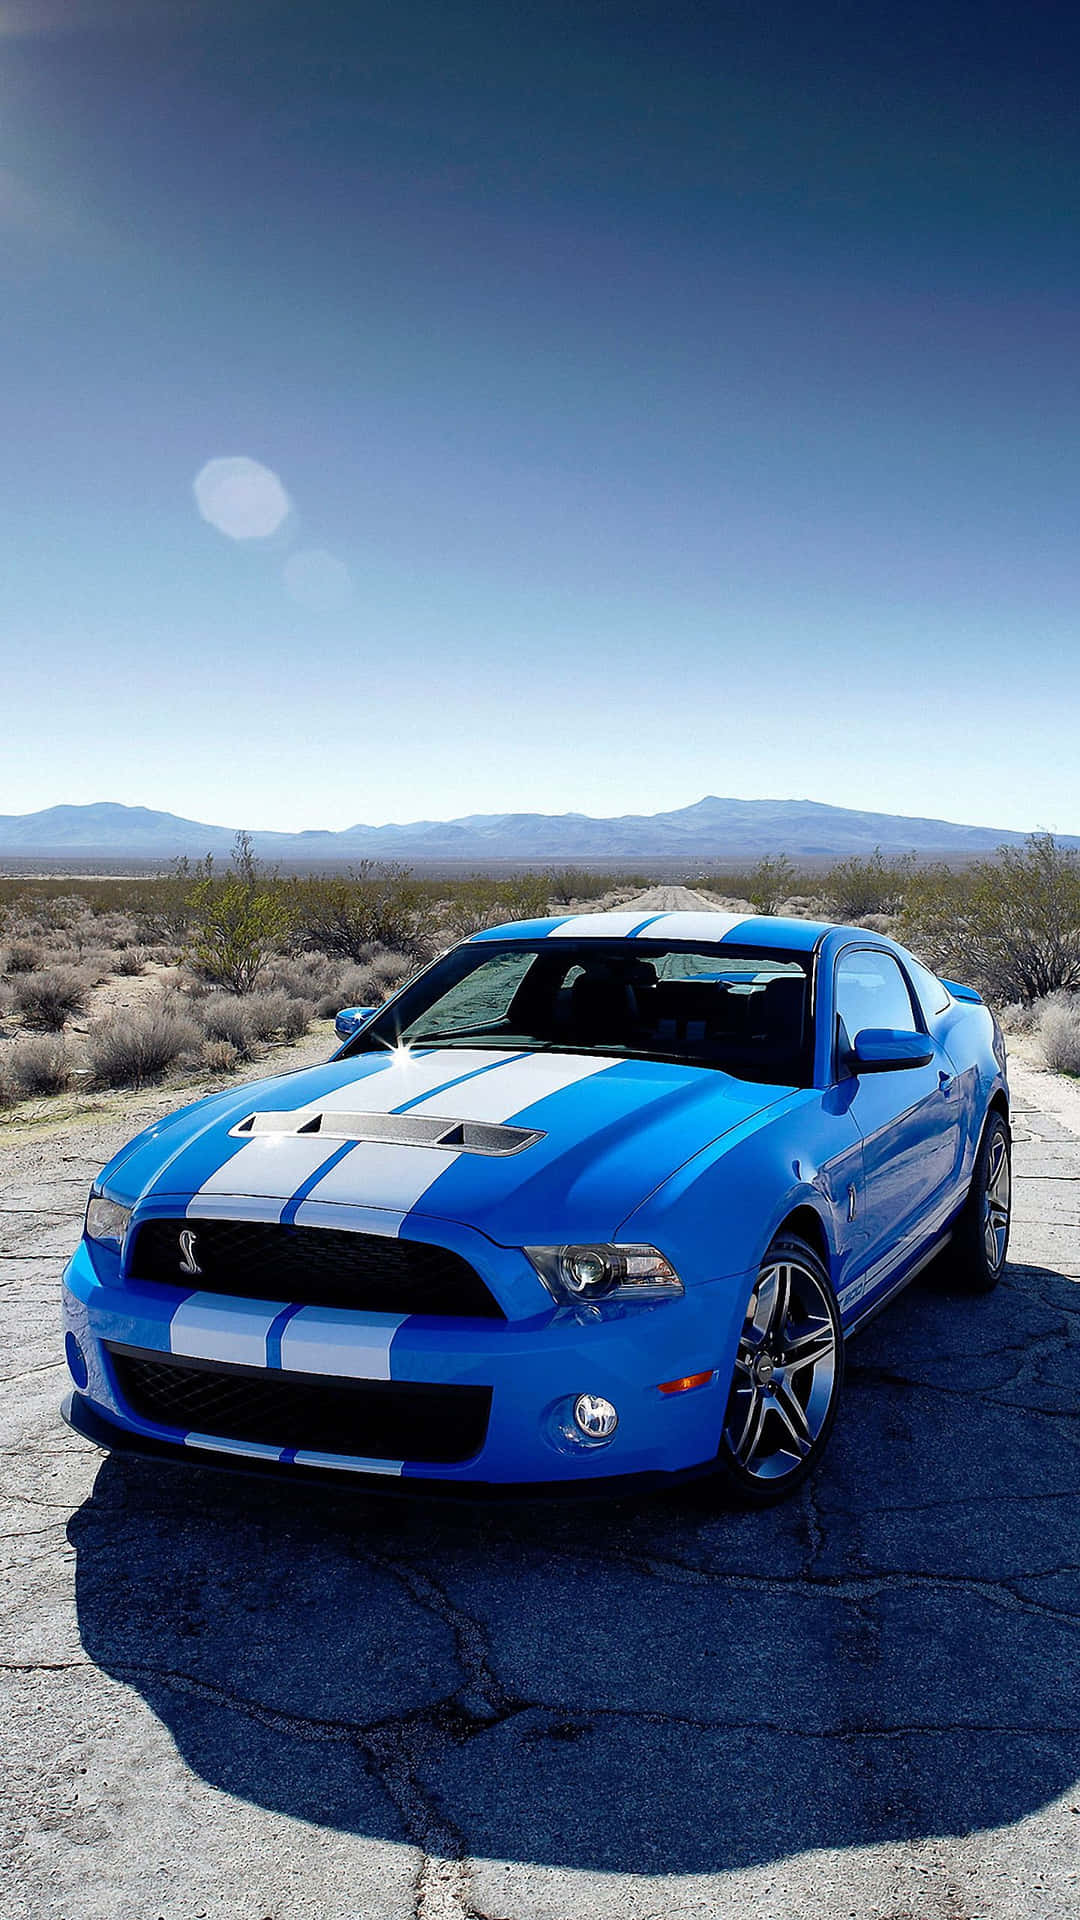 A Blue Ford Mustang Gt Parked In The Desert Wallpaper